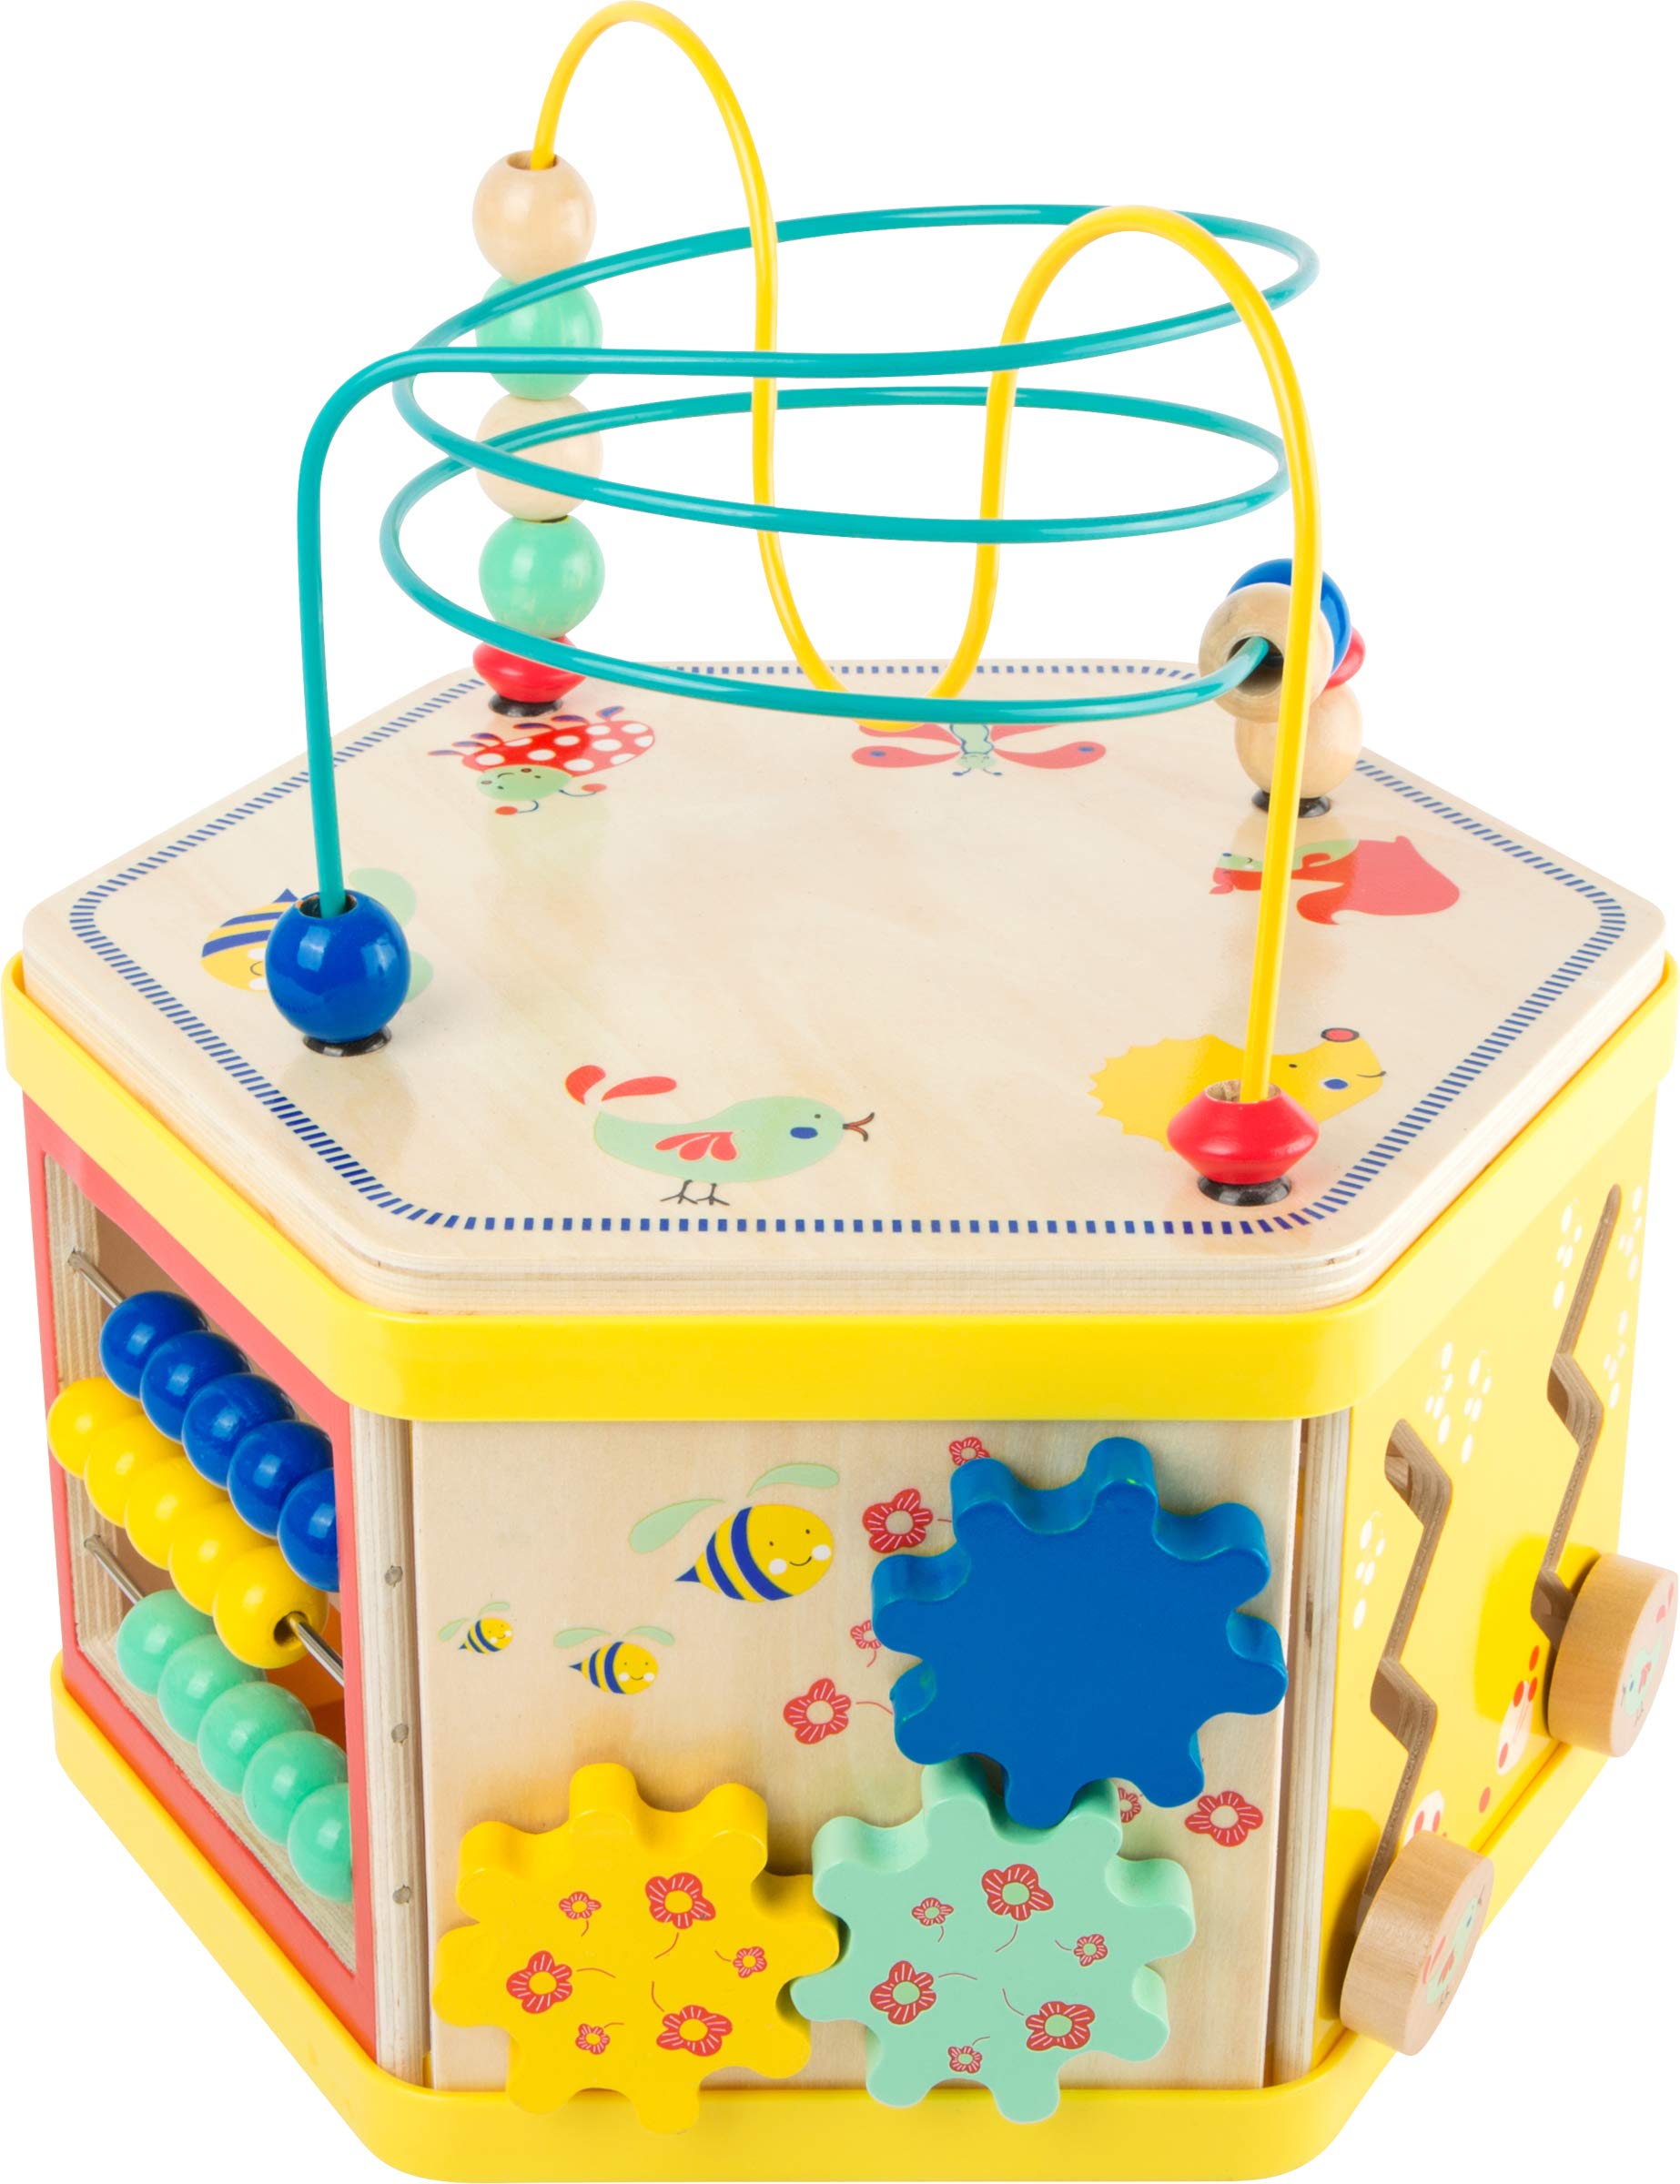 Small Foot Wooden Toys Activity Center 7-in-1 Iconic Motor Skills Move it! playset Designed for Children 12+ Months